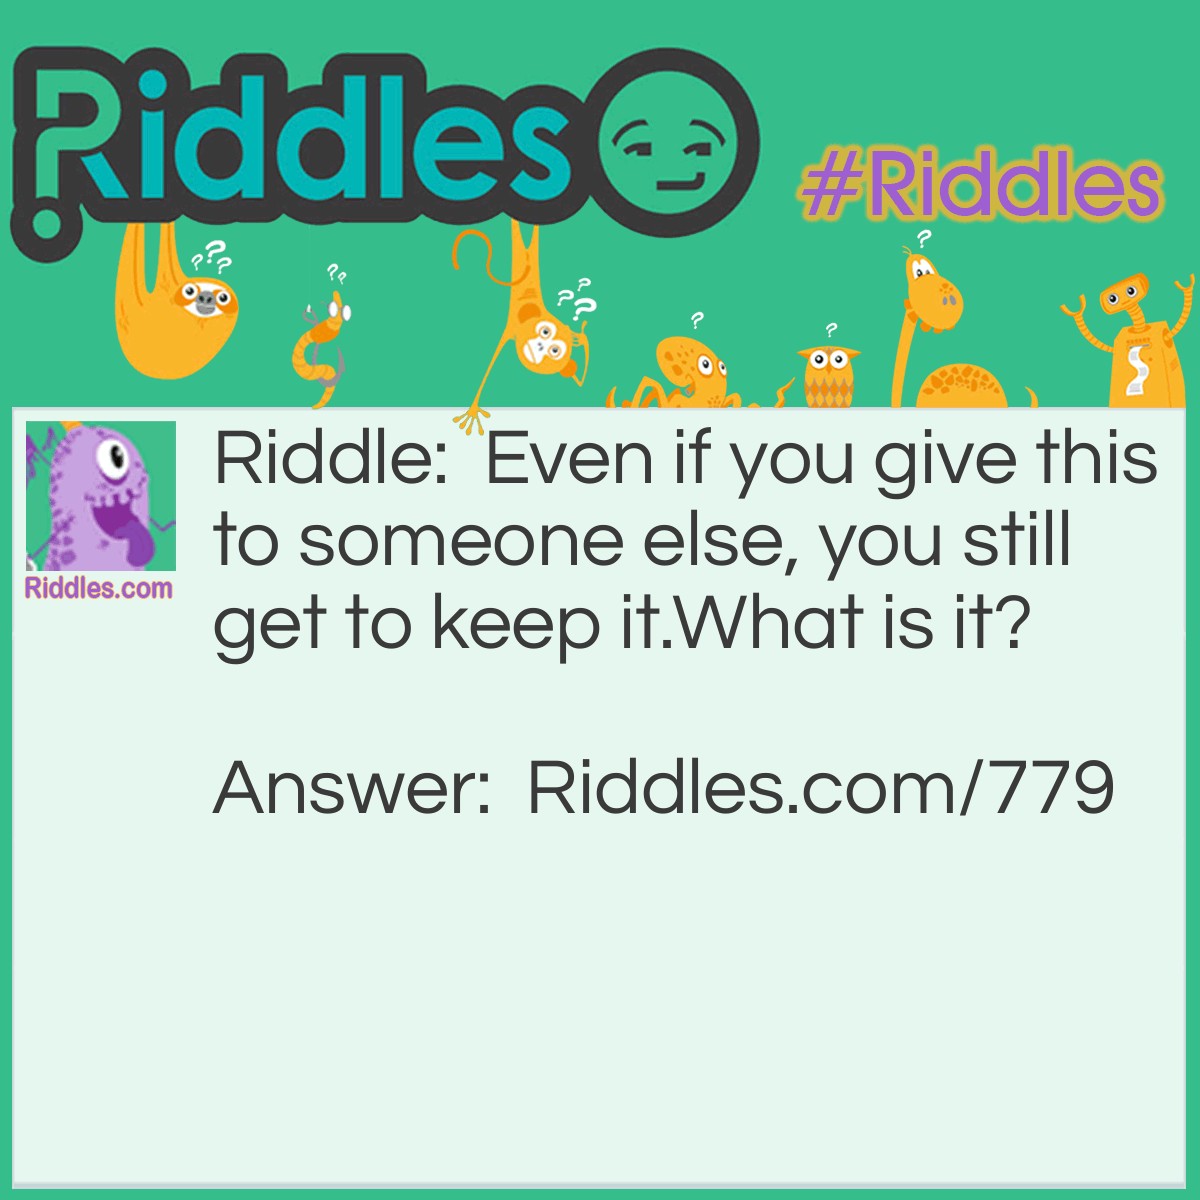 Riddle: Even if you give this to someone else, you still get to keep it.
What is it? Answer: It is your word.